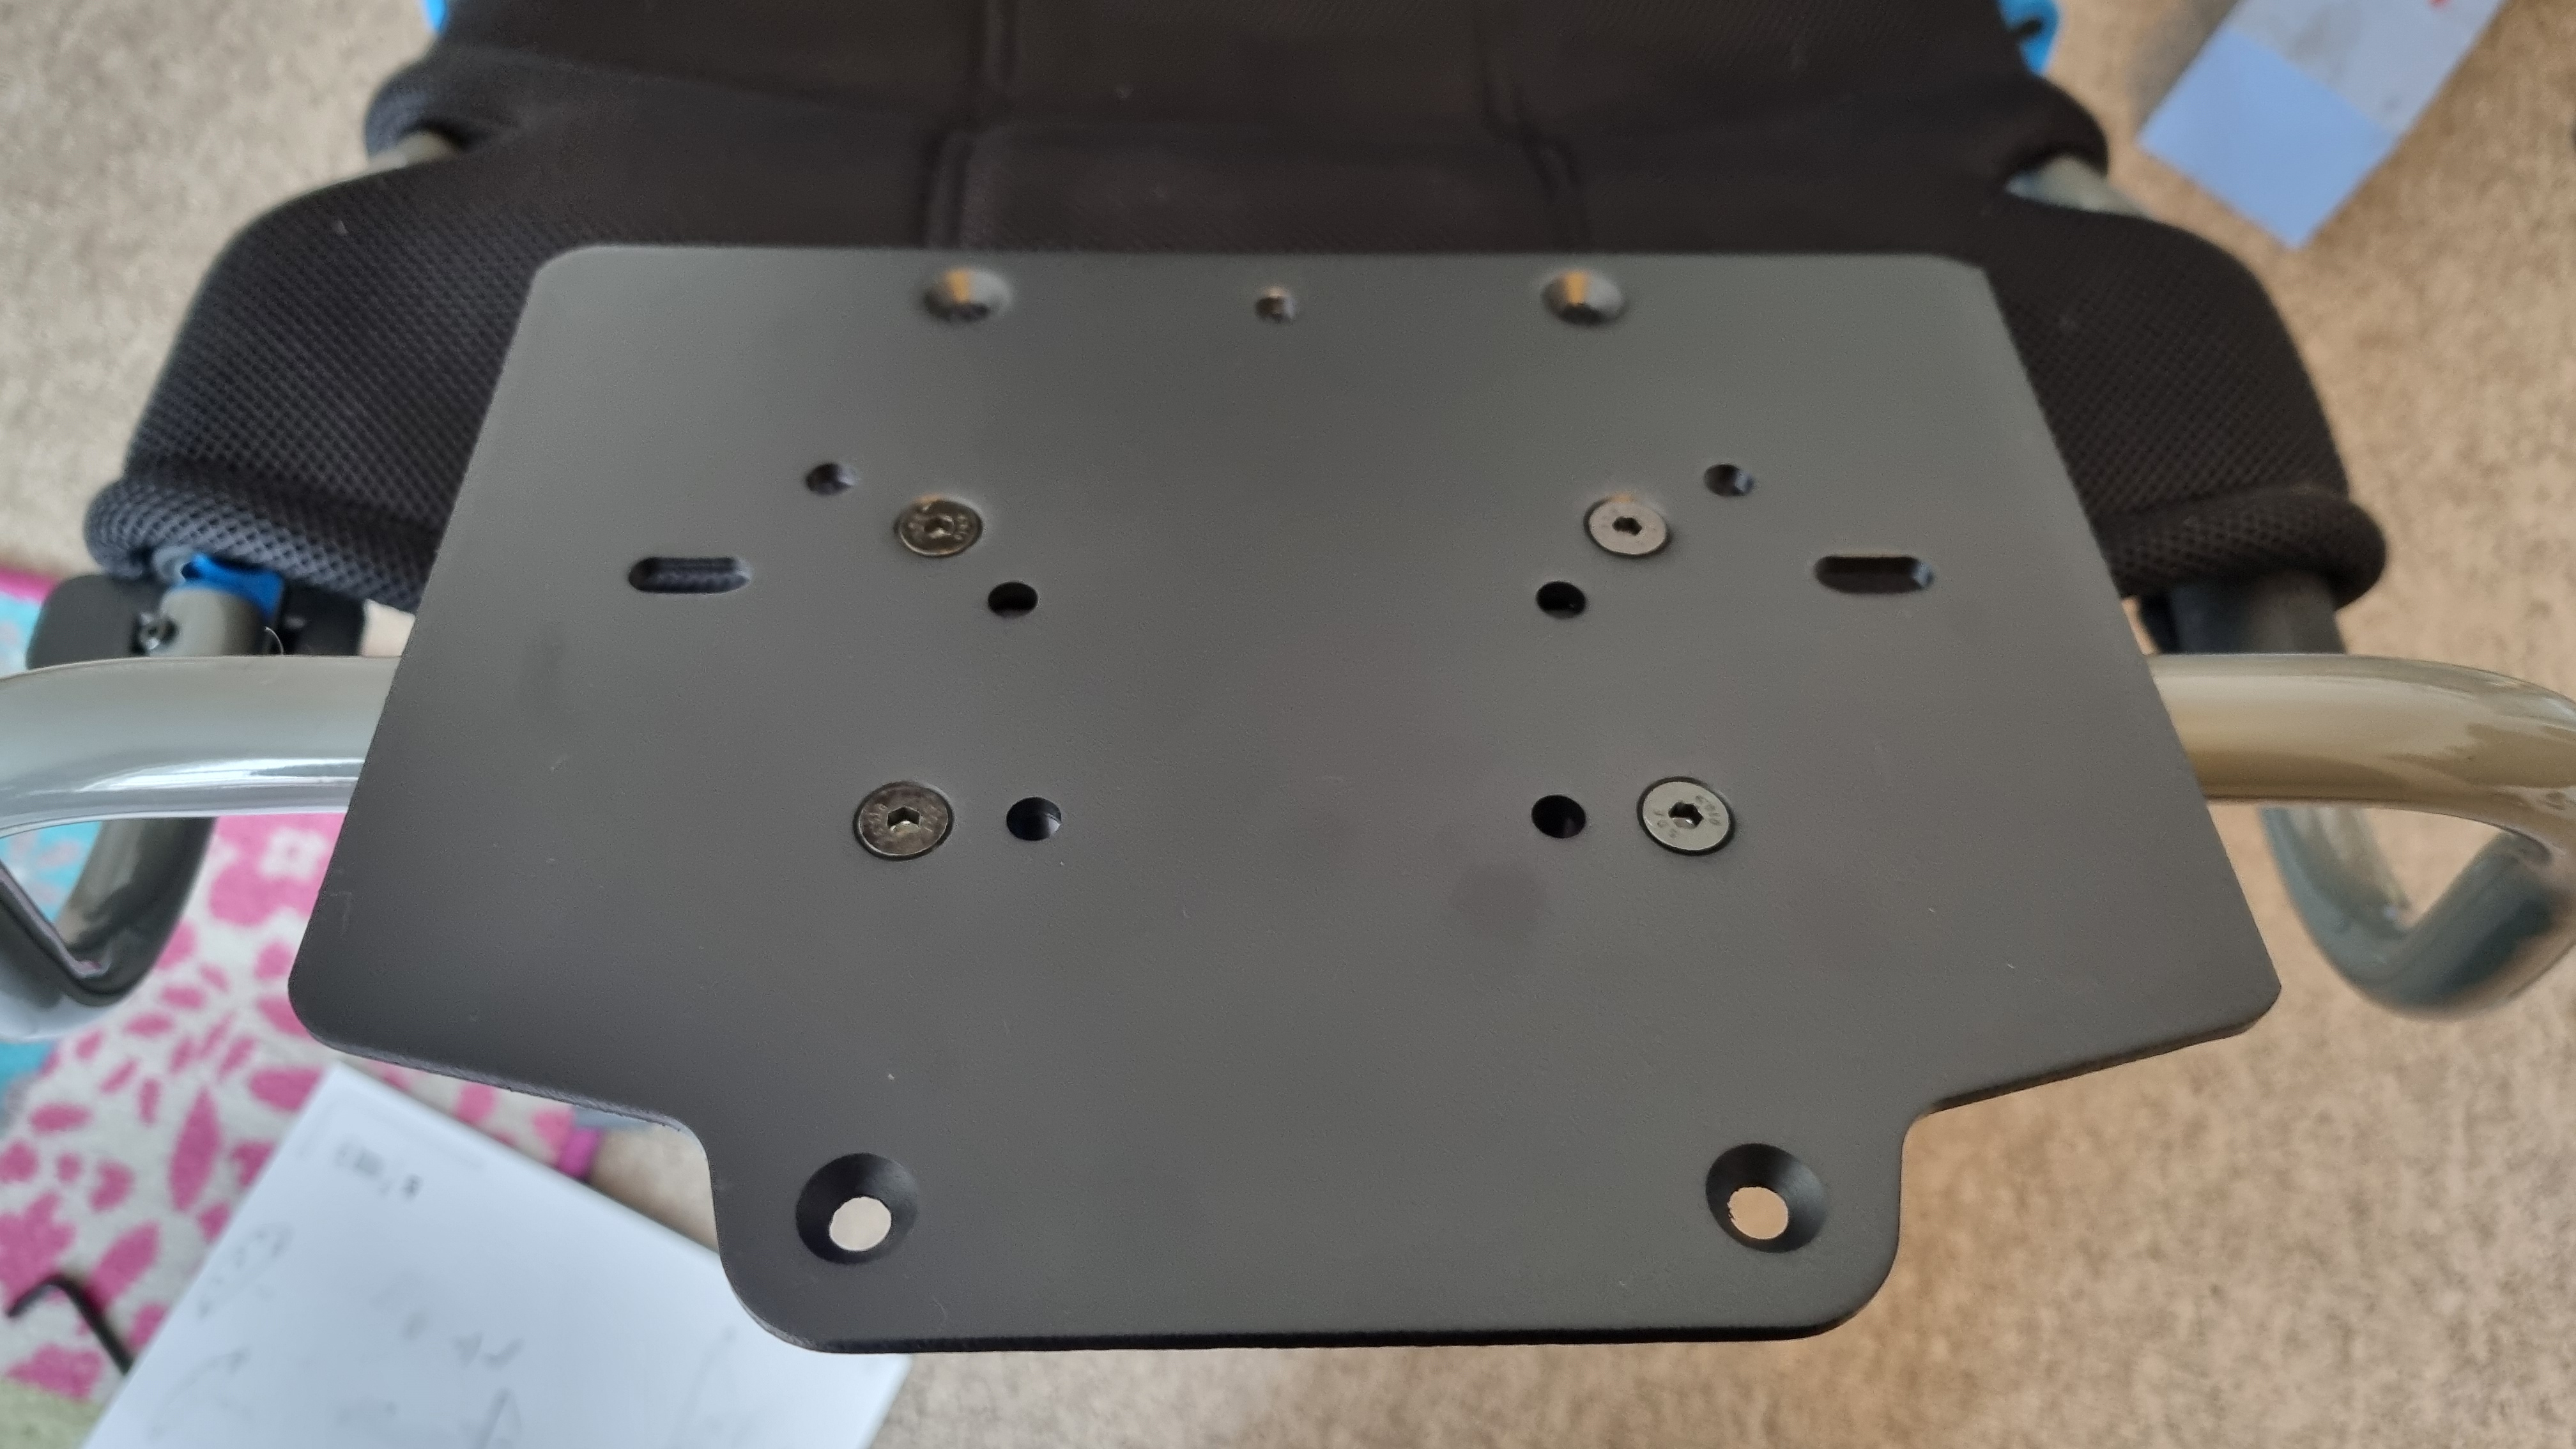 The wheelbase mounting plate, showing the multiple options for wheelbase mounts on the Logitech Playseat Challenge X